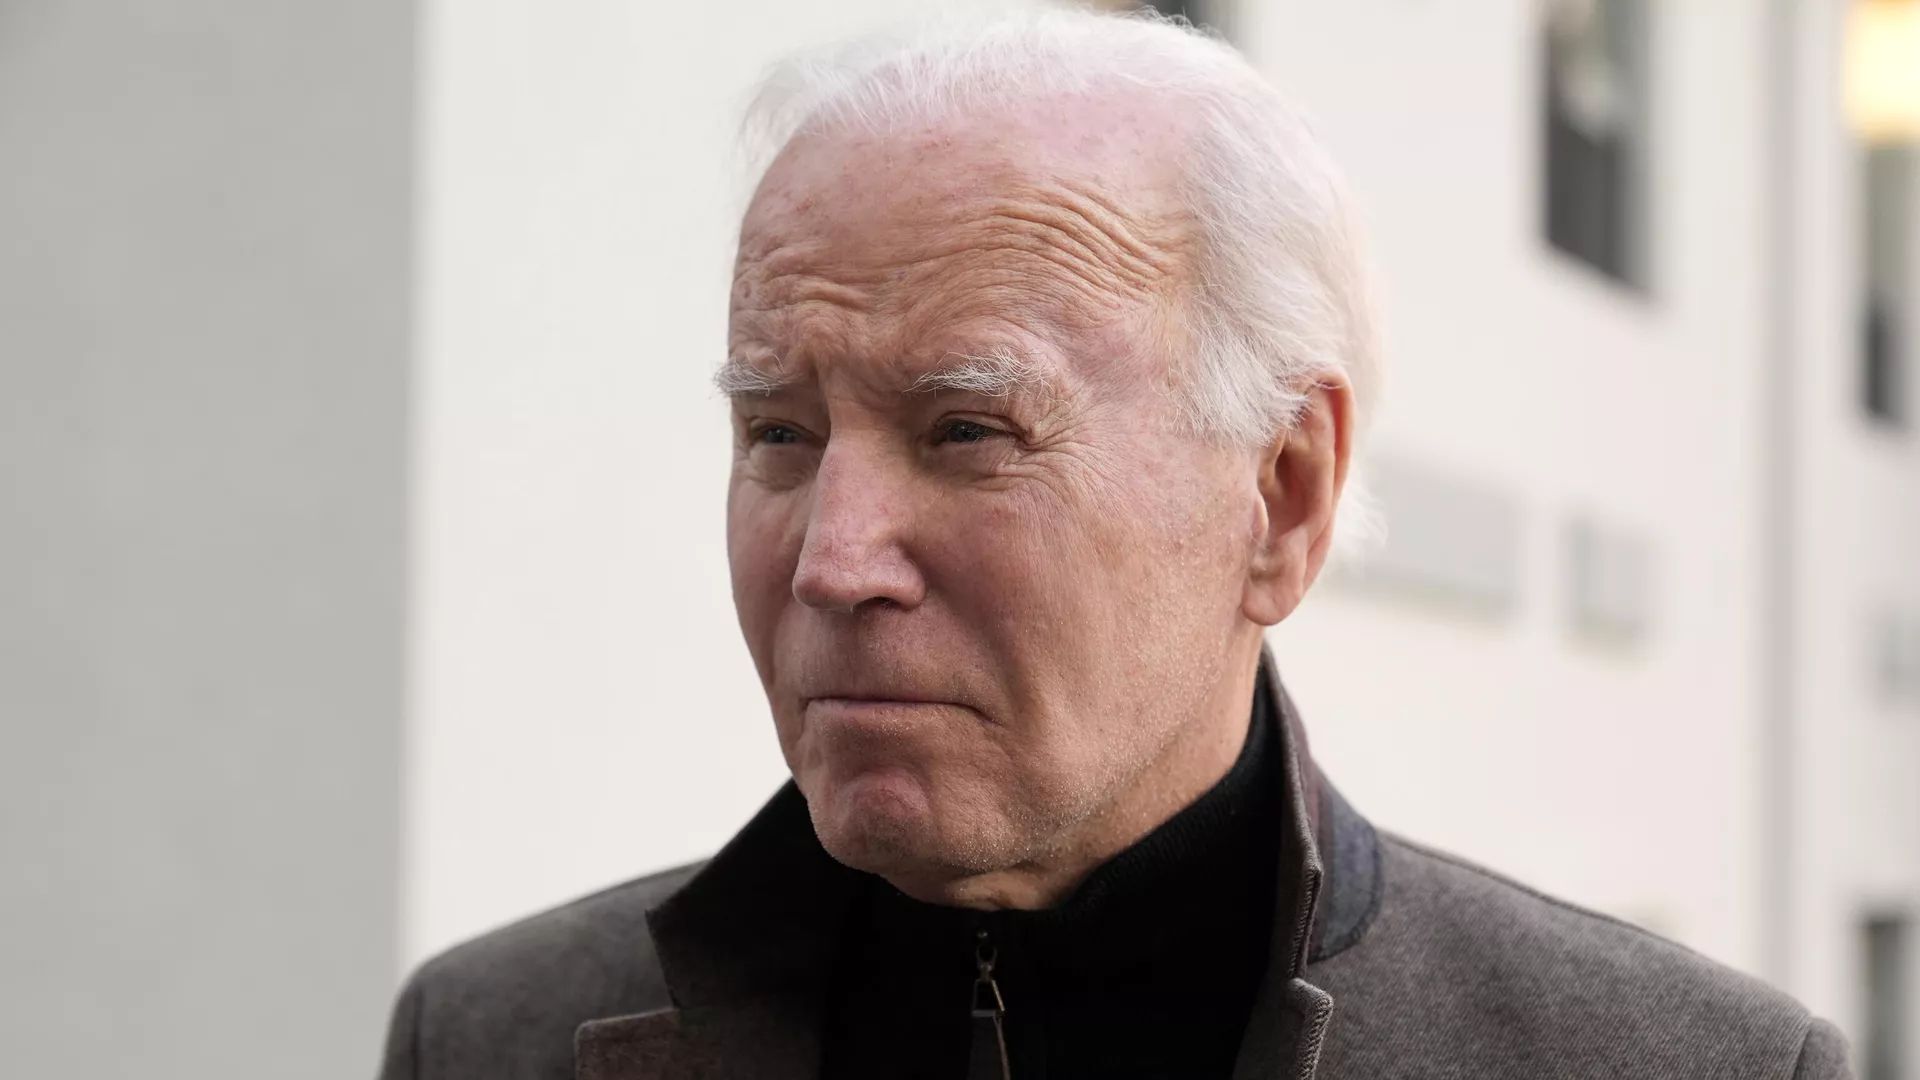 U.S. Congress blames Biden for escalating tensions in the Middle East